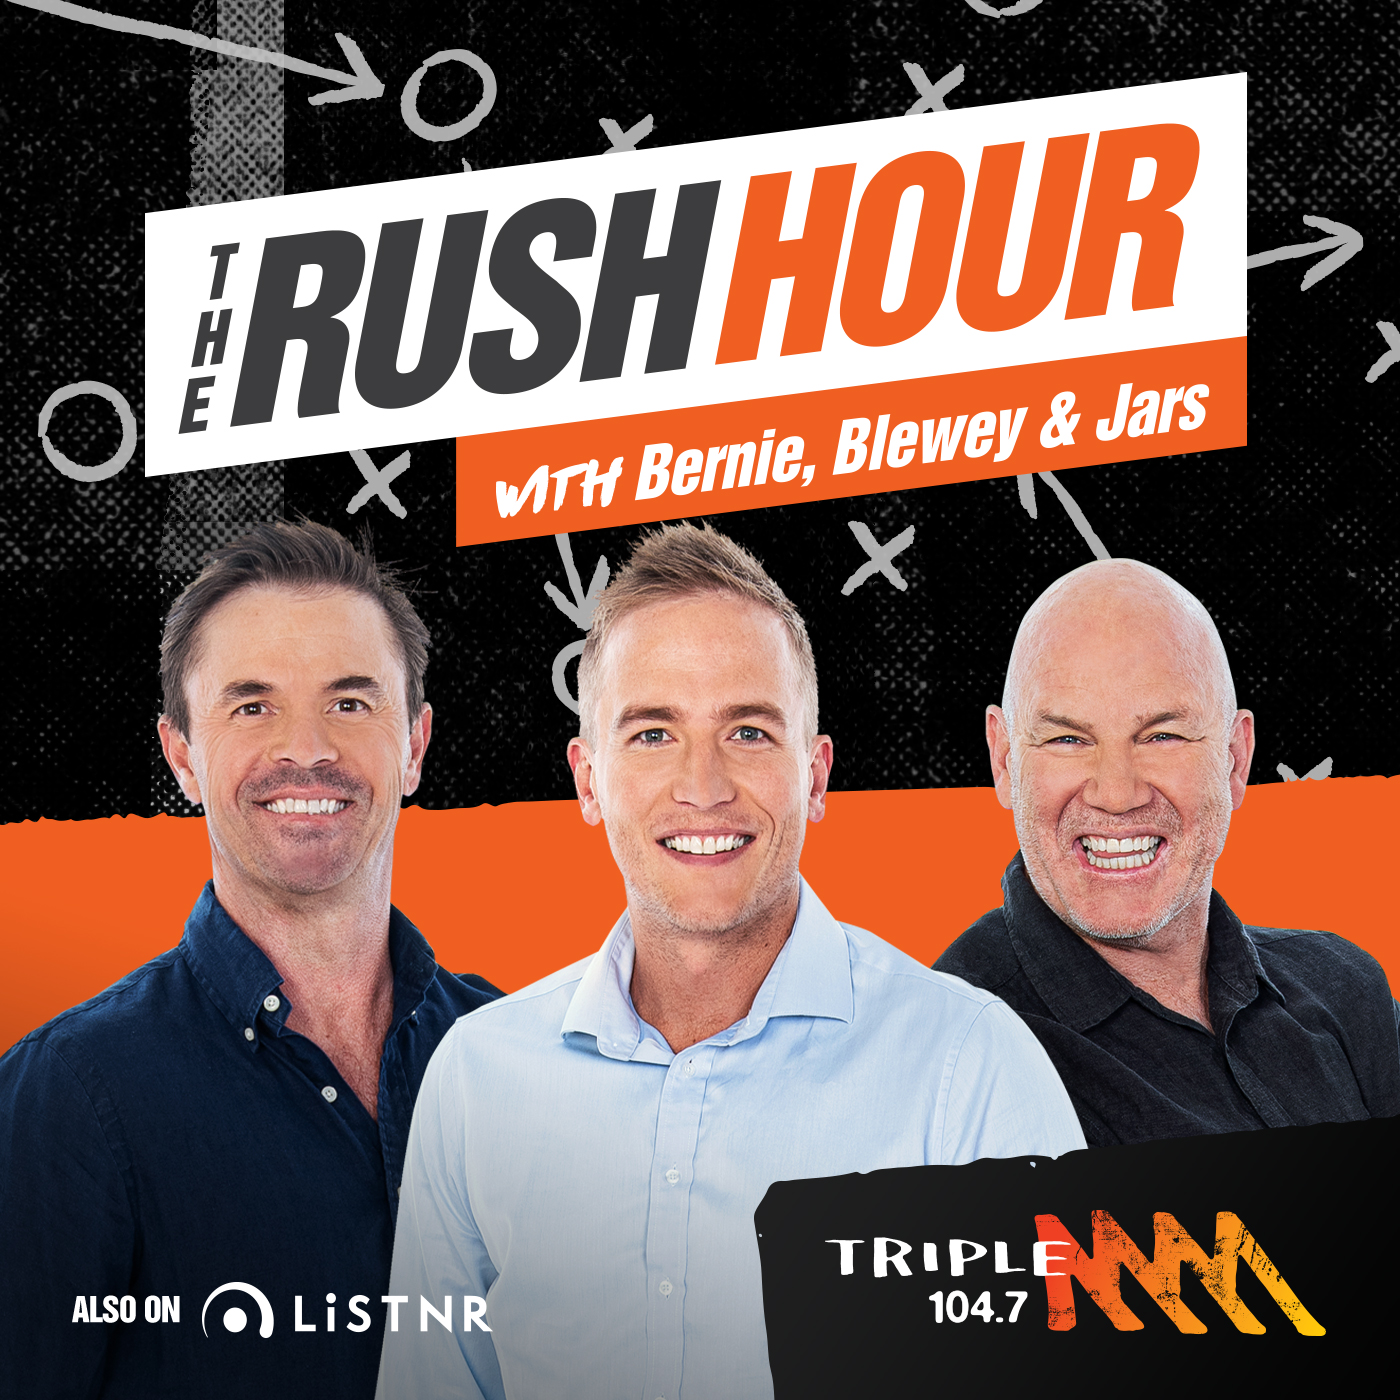 FULL SHOW - AFL Captains Day, The Furious Five Quiz & Bernie's Final Facts. - The Rush Hour with Bernie, Blewey & Jars.